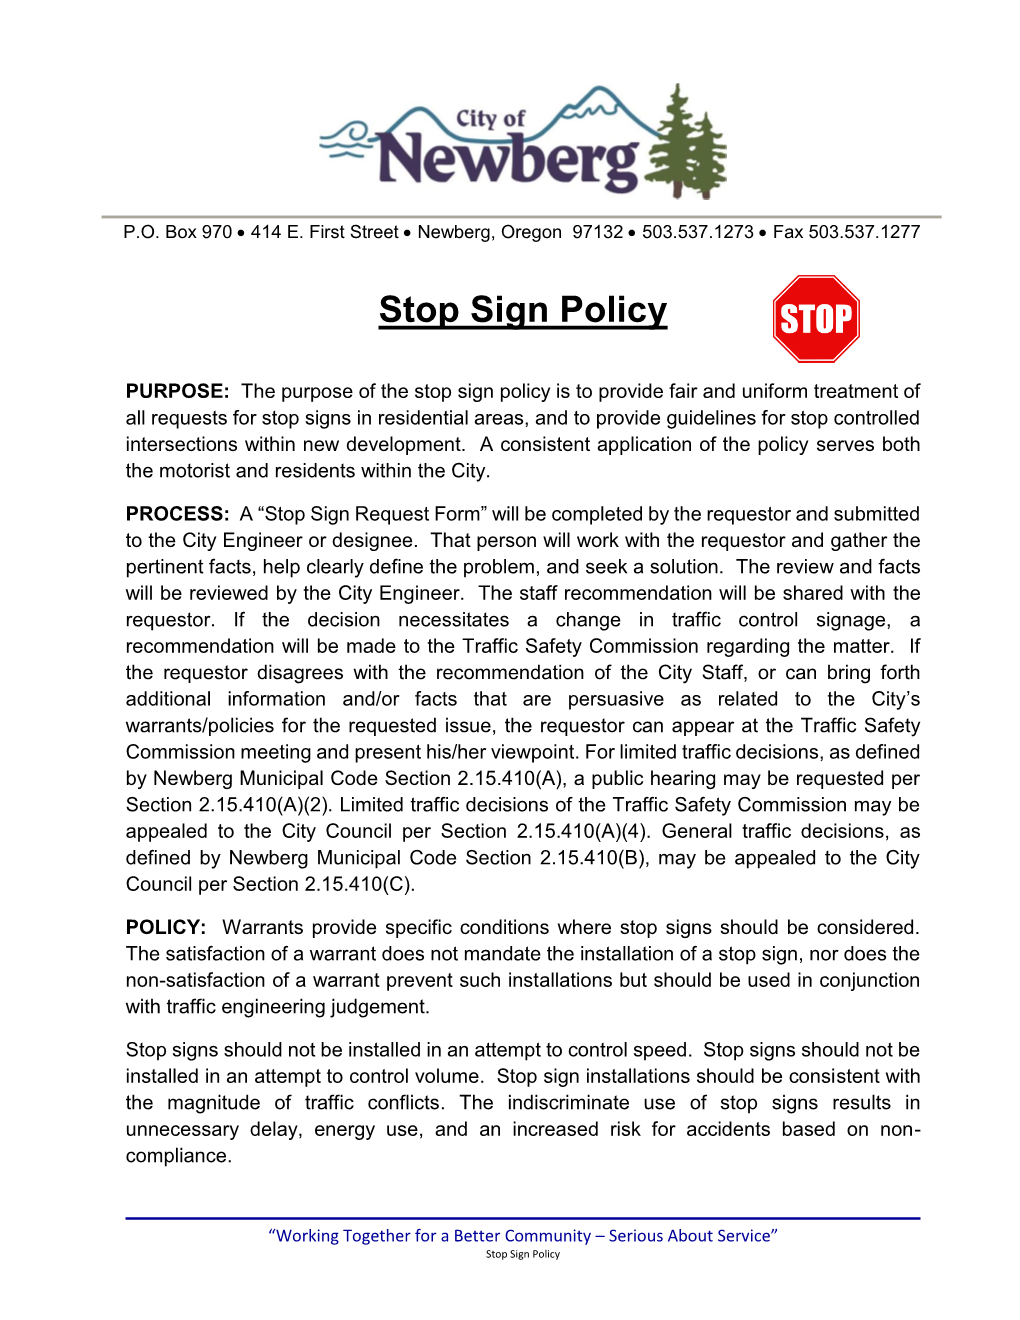 Stop Sign Policy Packet